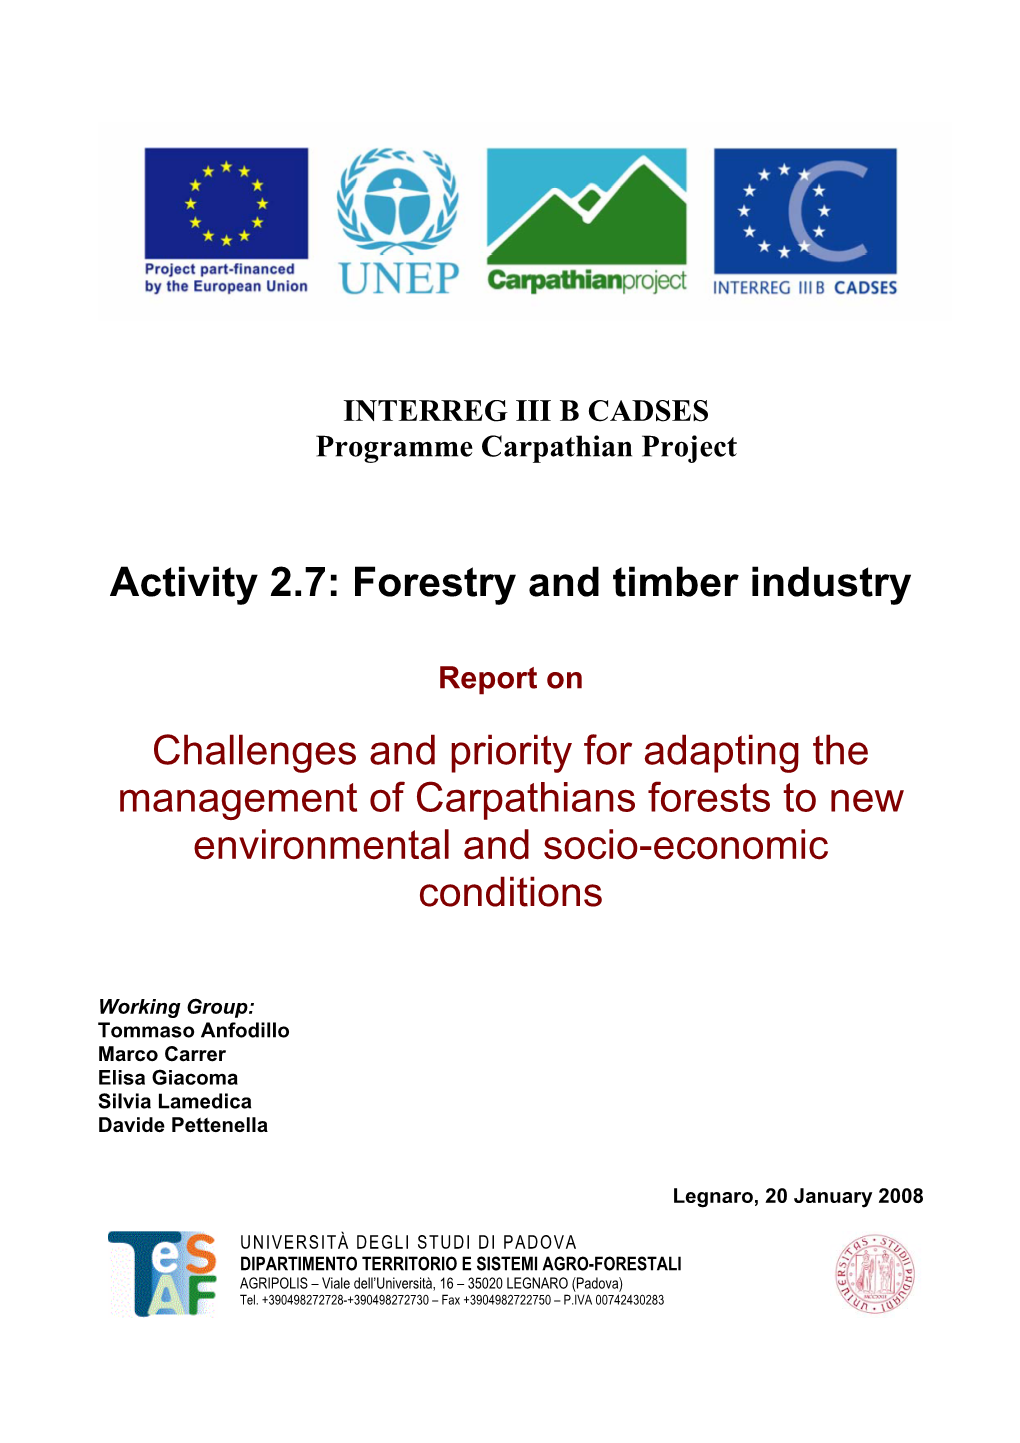 Activity 2.7: Forestry and Timber Industry Challenges and Priority For